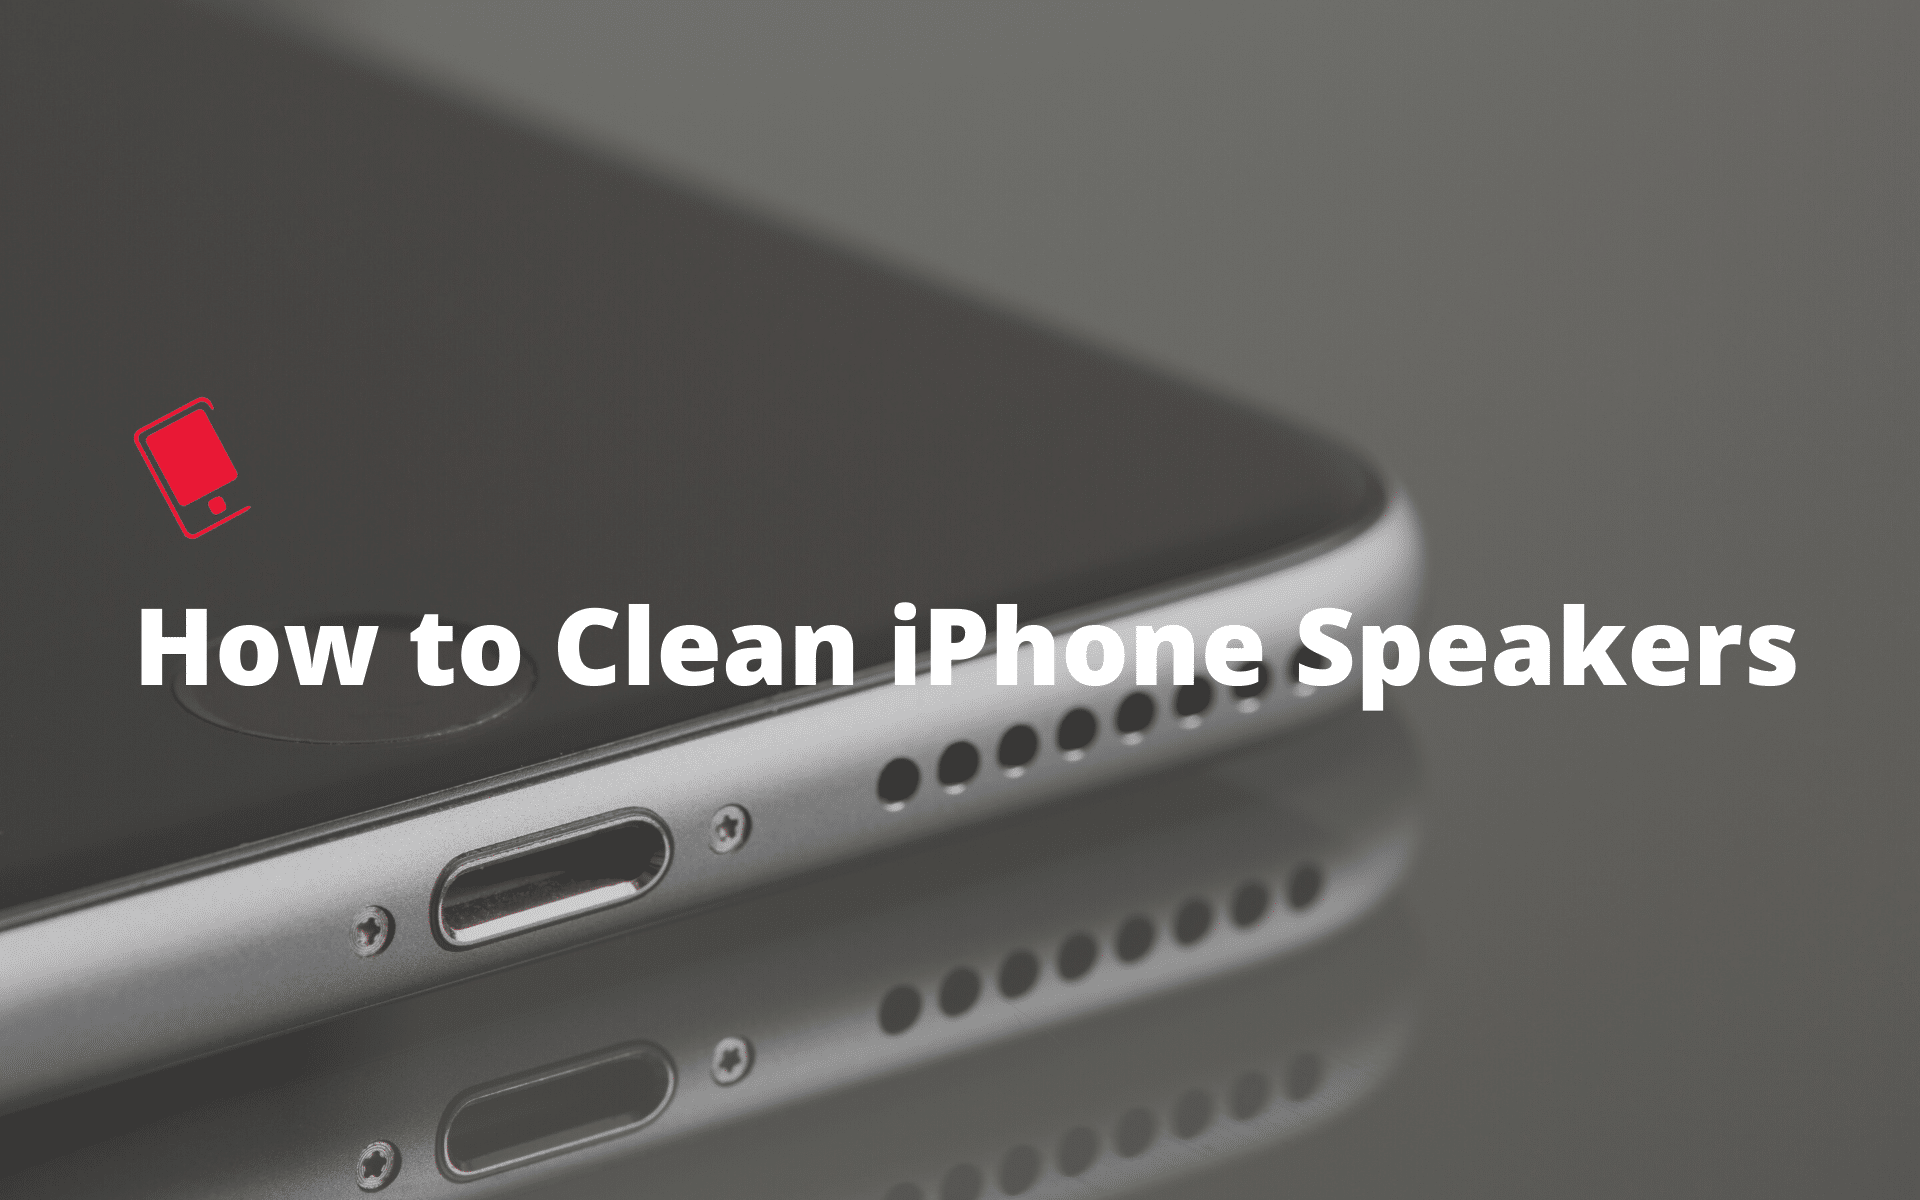 How to clean iPhone speakers